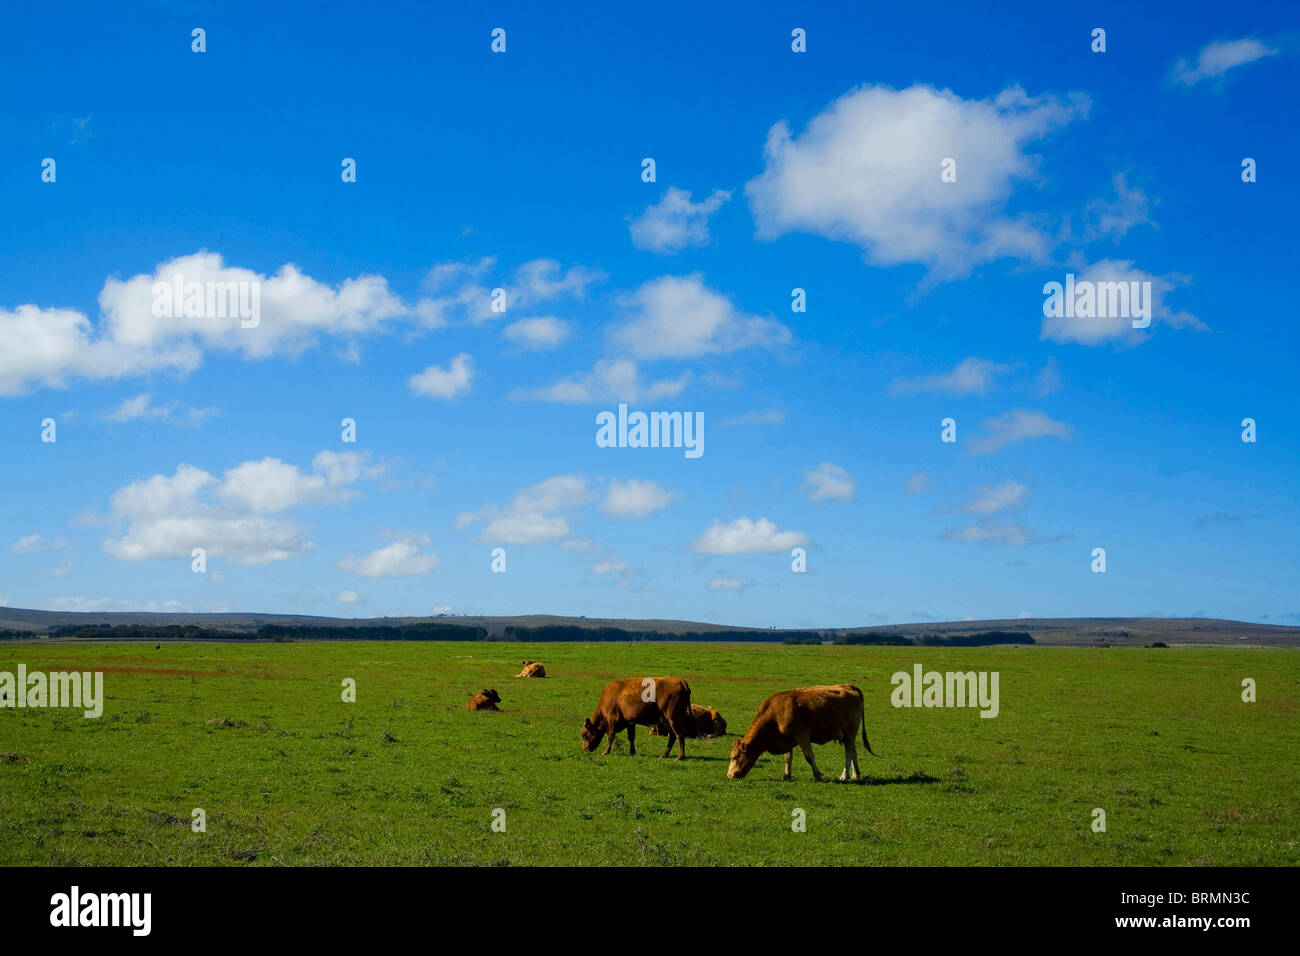 Cows grazing in green field Stock Photo